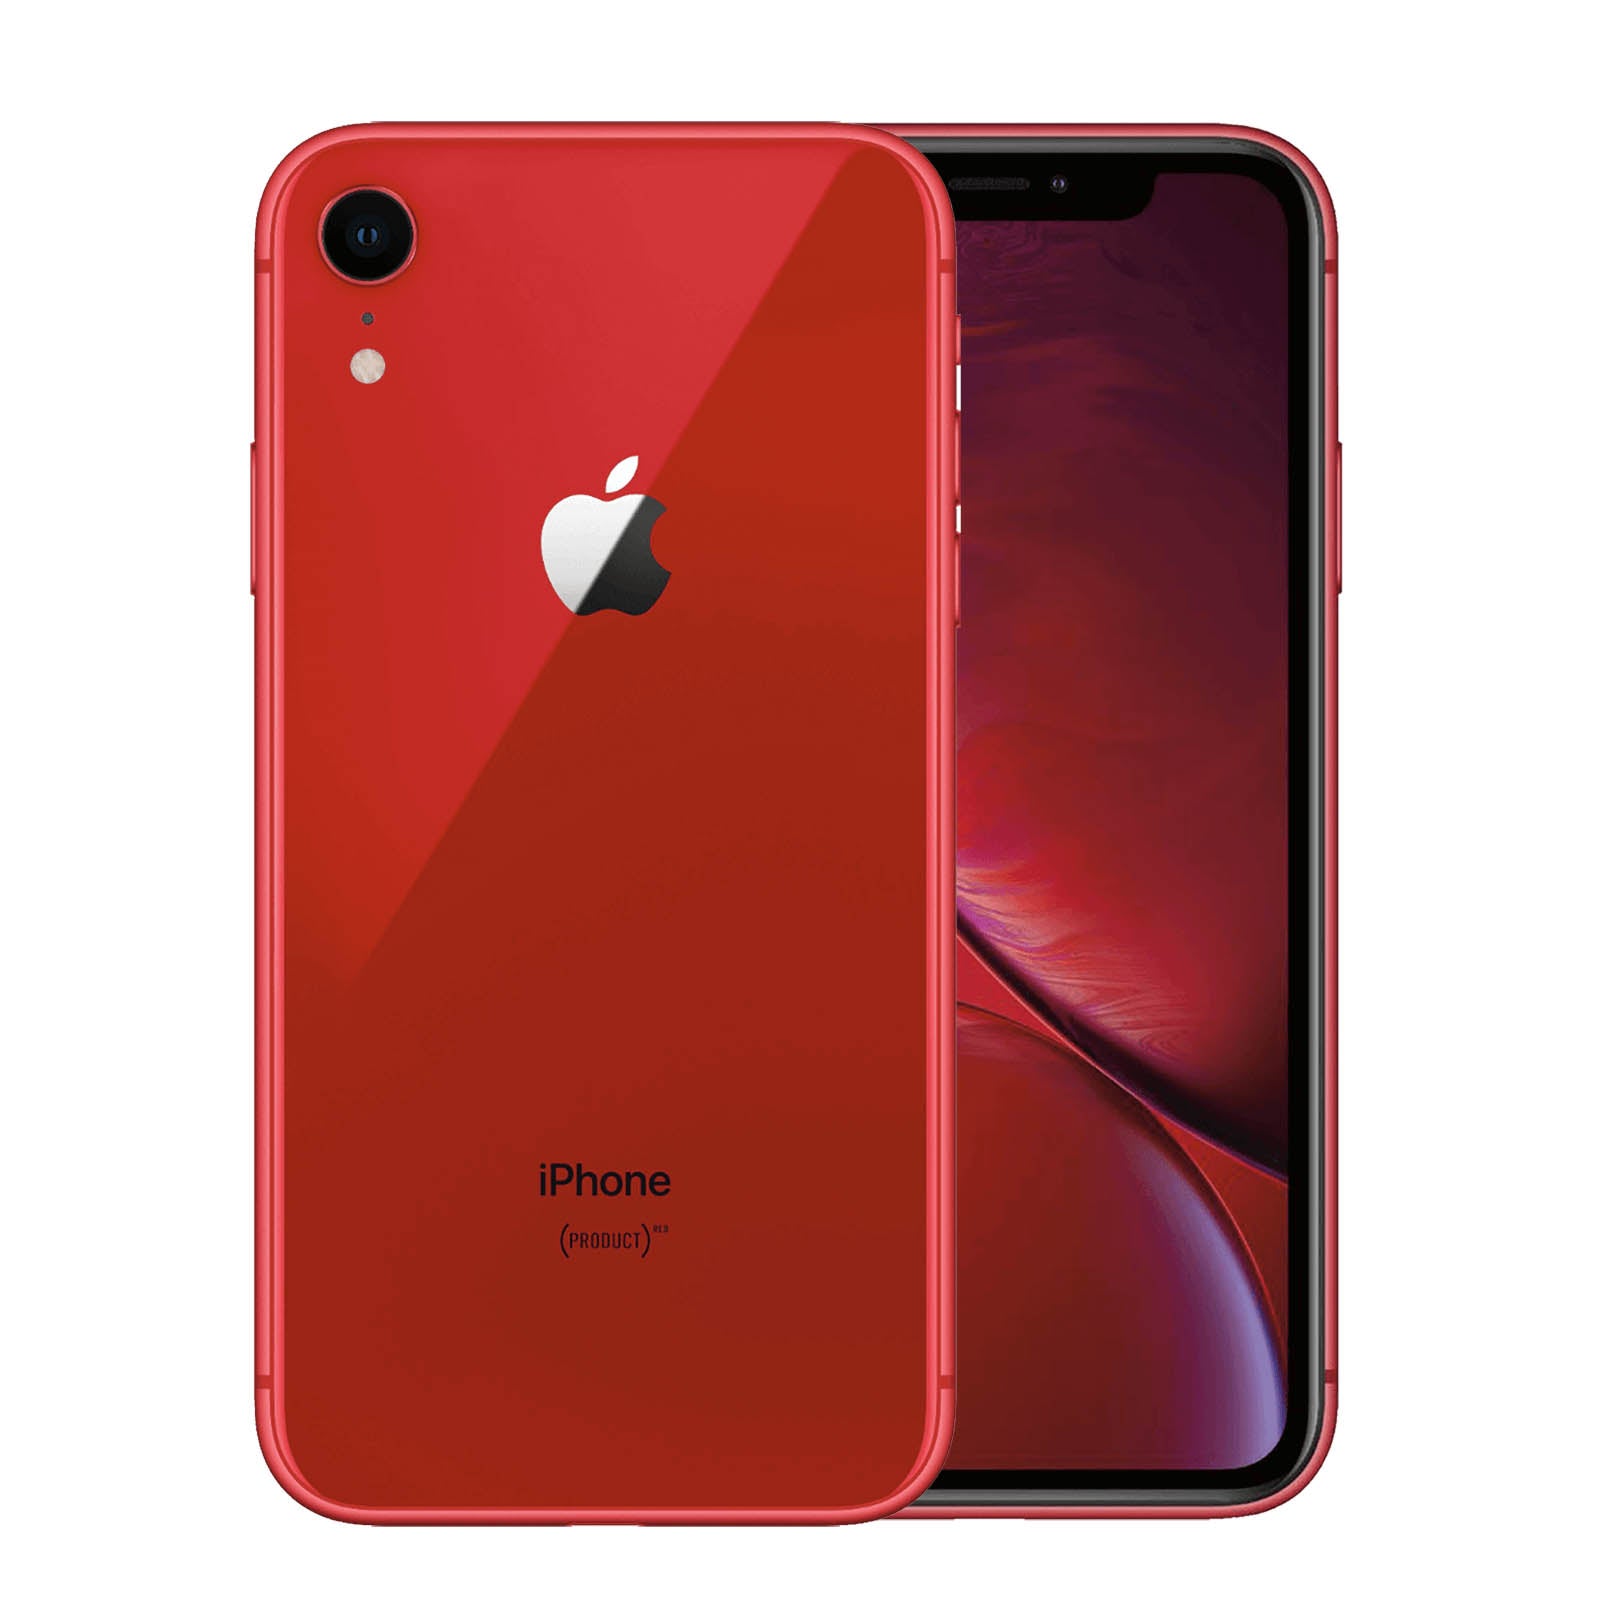 Apple iPhone XR 64GB Product Red Good - Unlocked